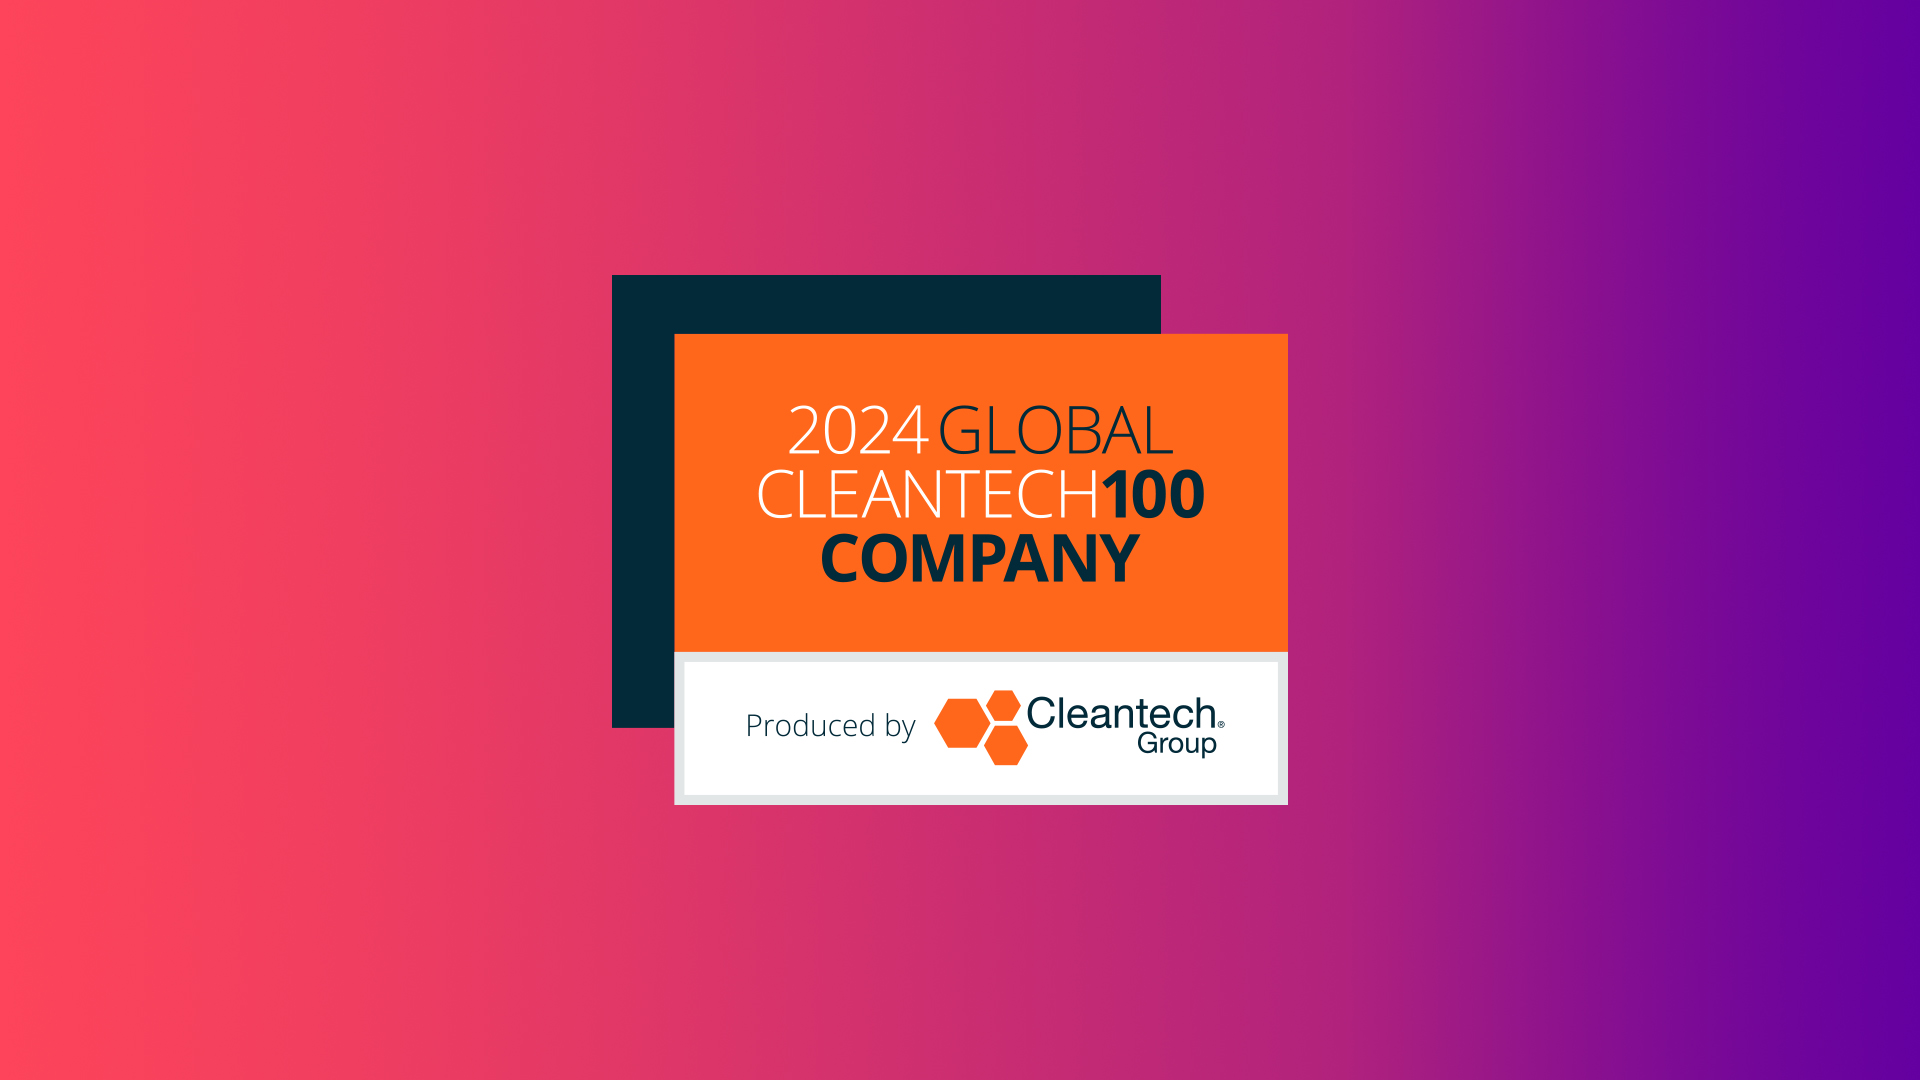 Hydrogenious LOHC Technologies named on the 2024 Global Cleantech 100